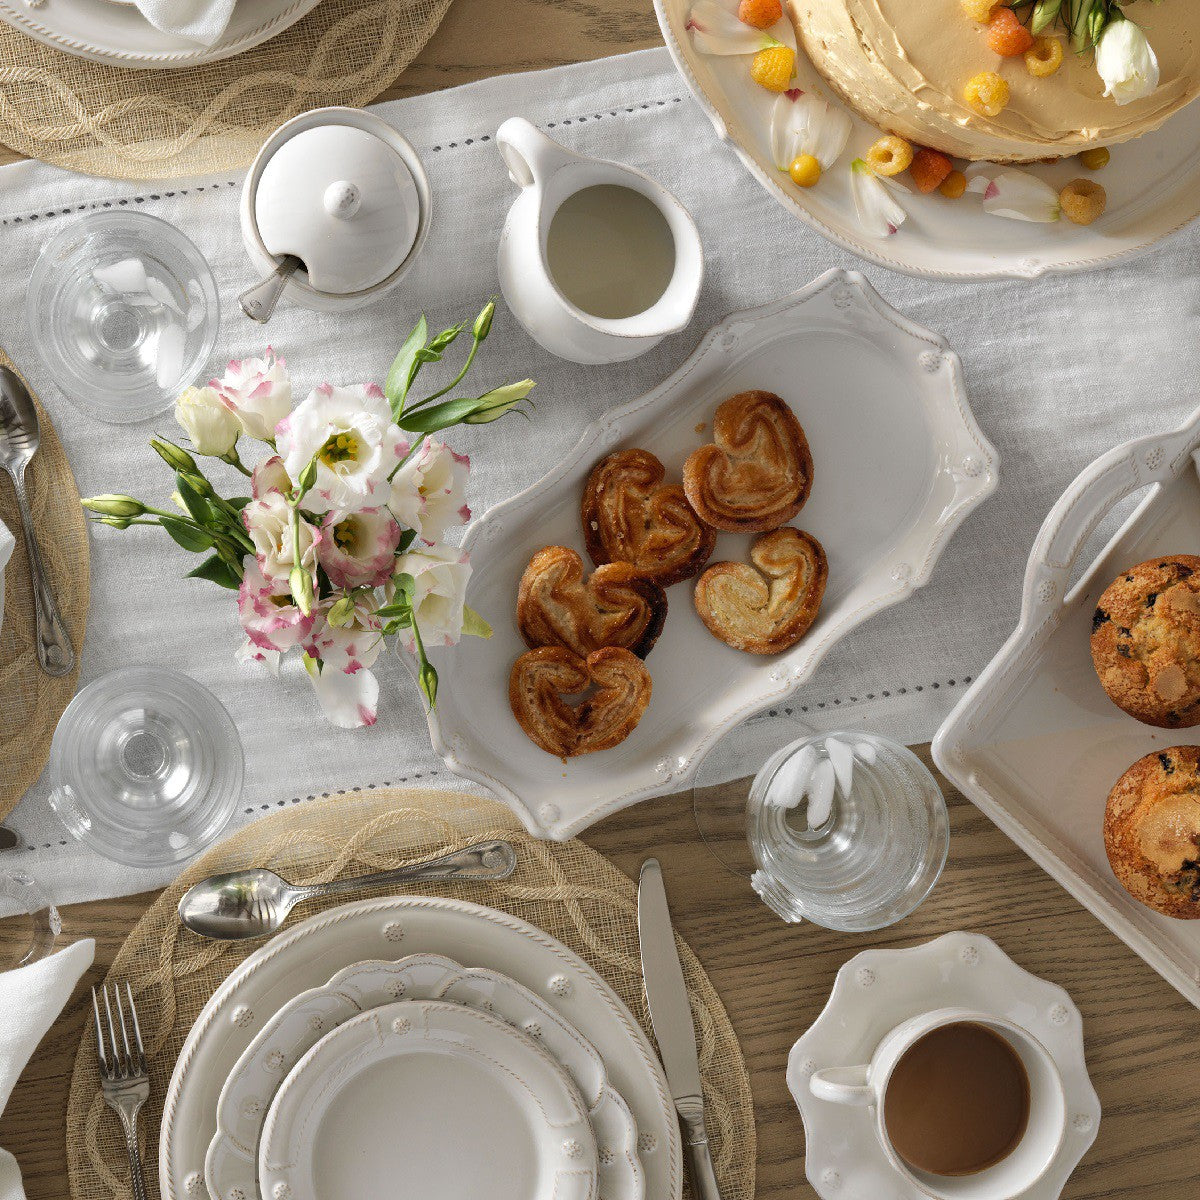 table setting with glasses, coffee cup, sugar bowl, cake stand, and floral arrangement on a wood table with a white table runner